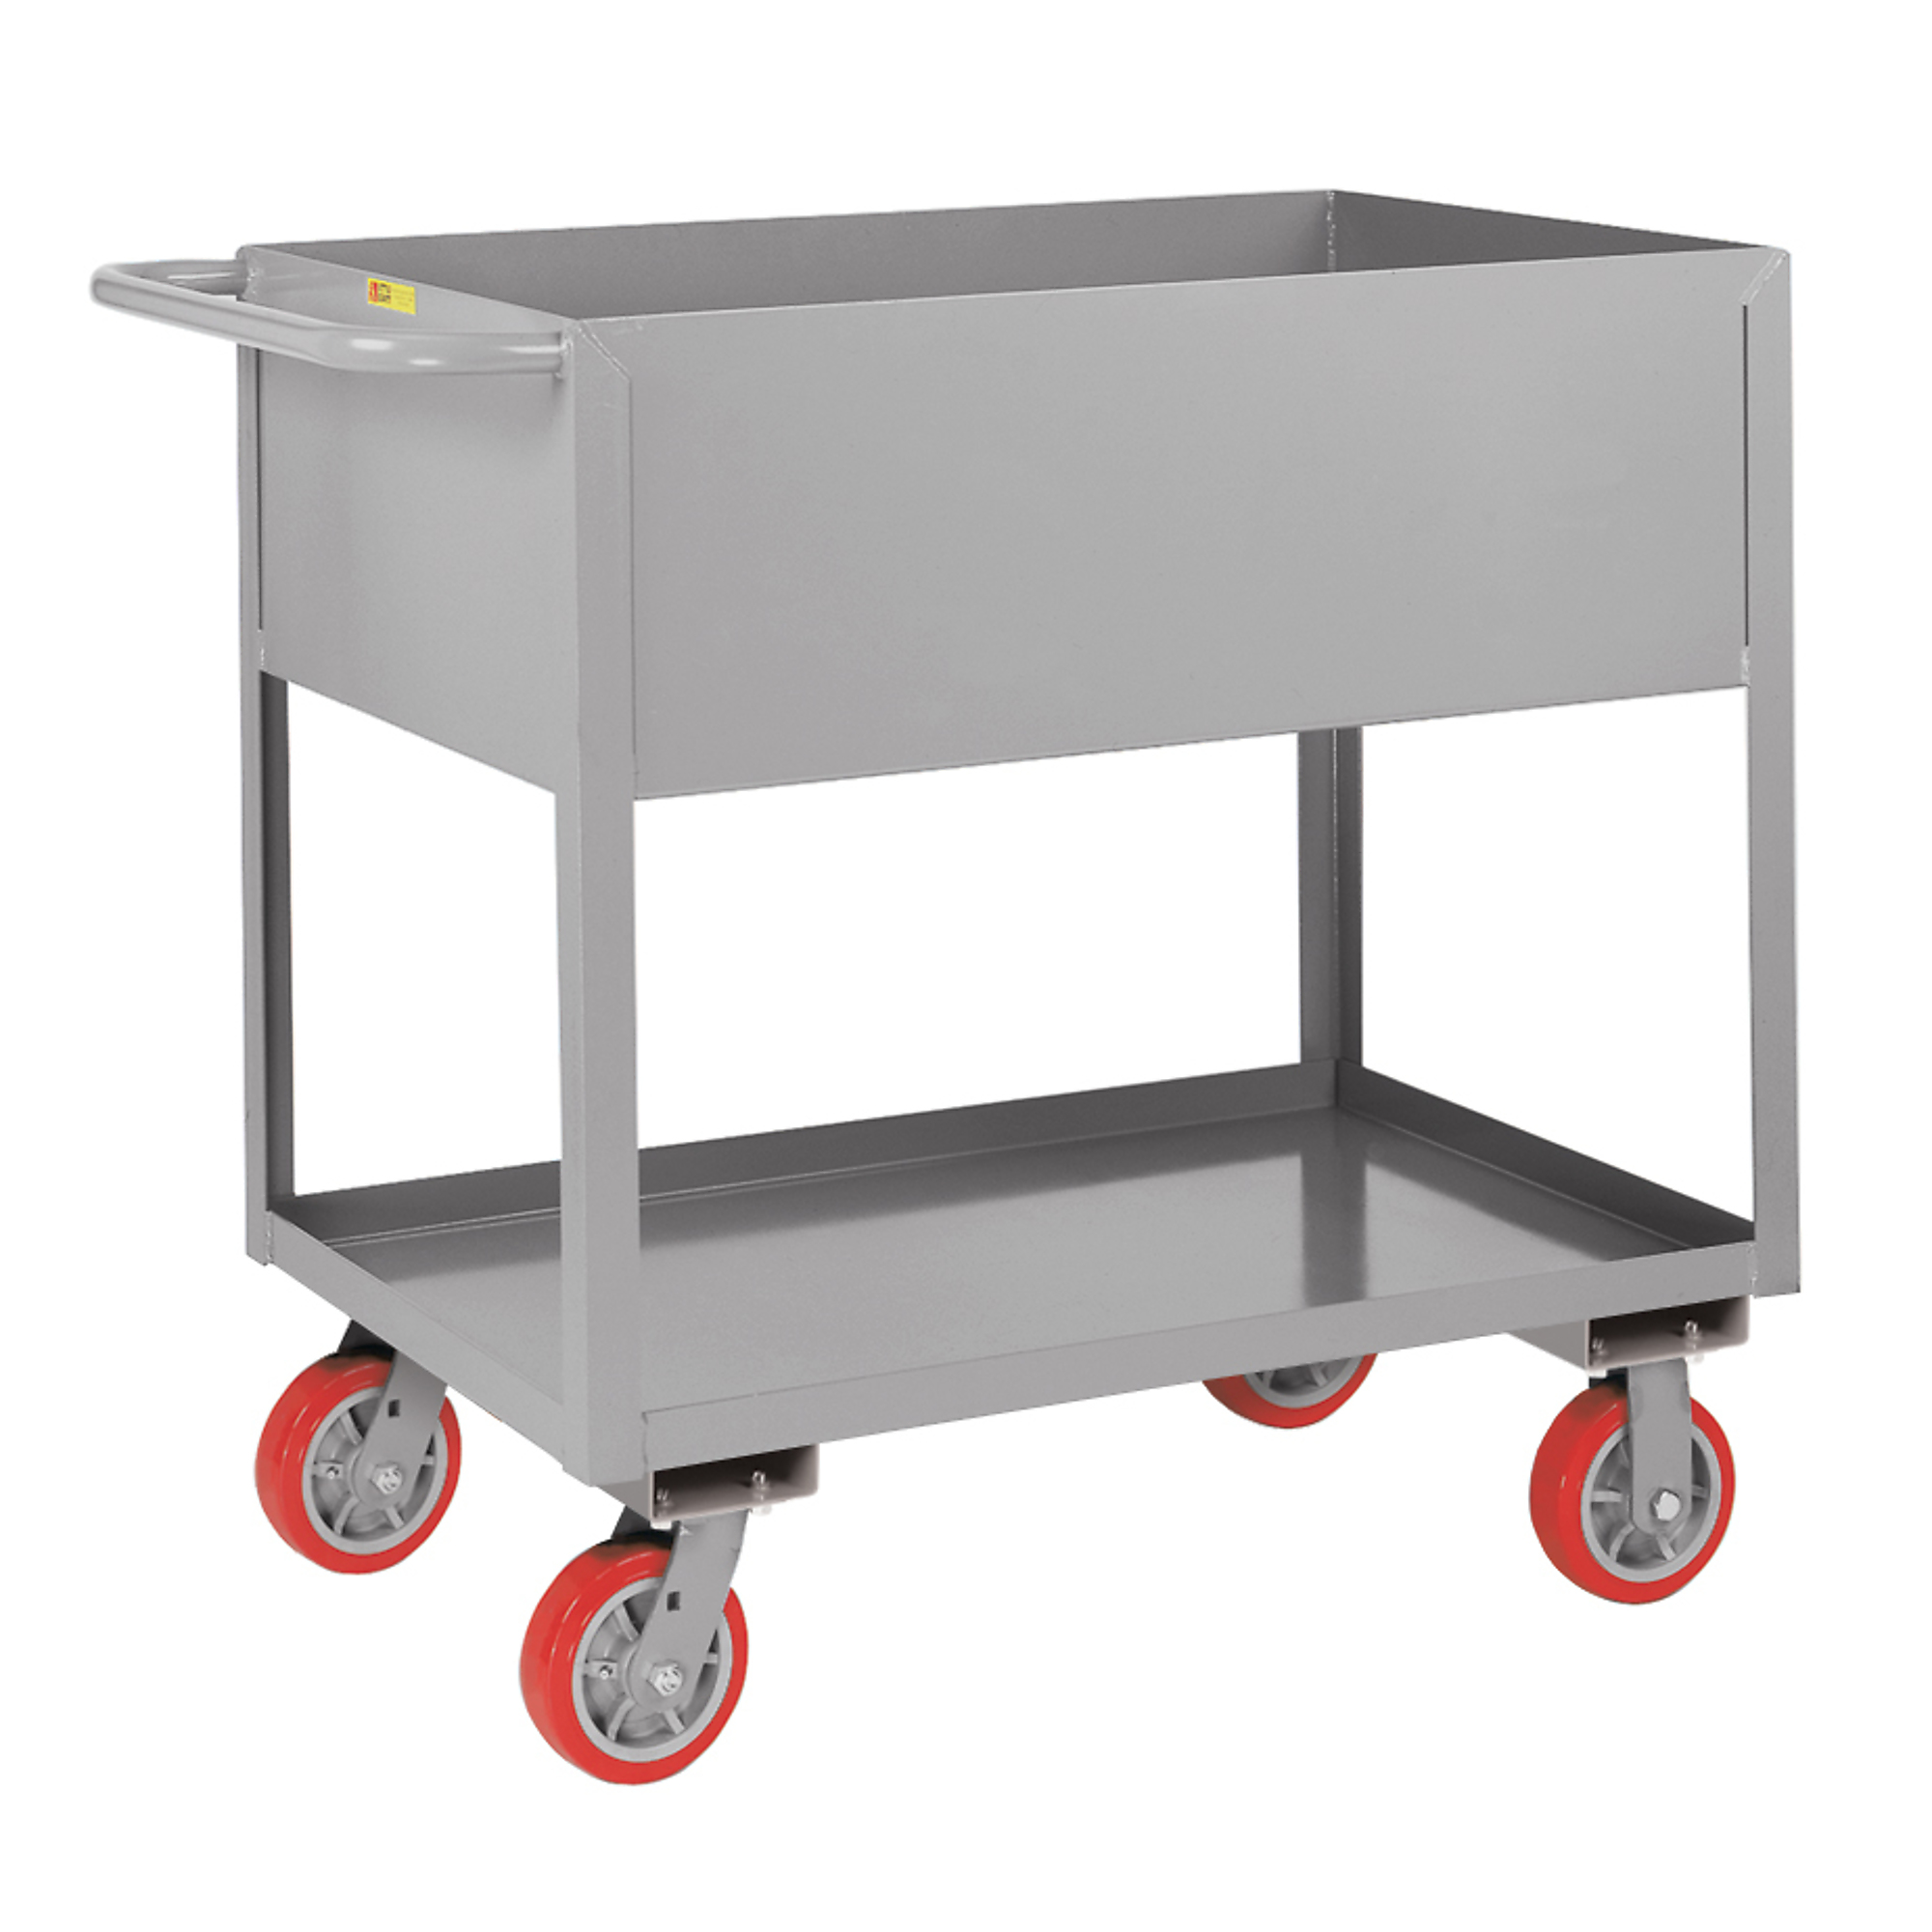 Little Giant, 12Inch Deep Shelf Truck, 24x48, 3600 lbs, Total Capacity 3600 lb, Shelves (qty.) 2, Material Carbon Steel, Model DS2448X12-6PY